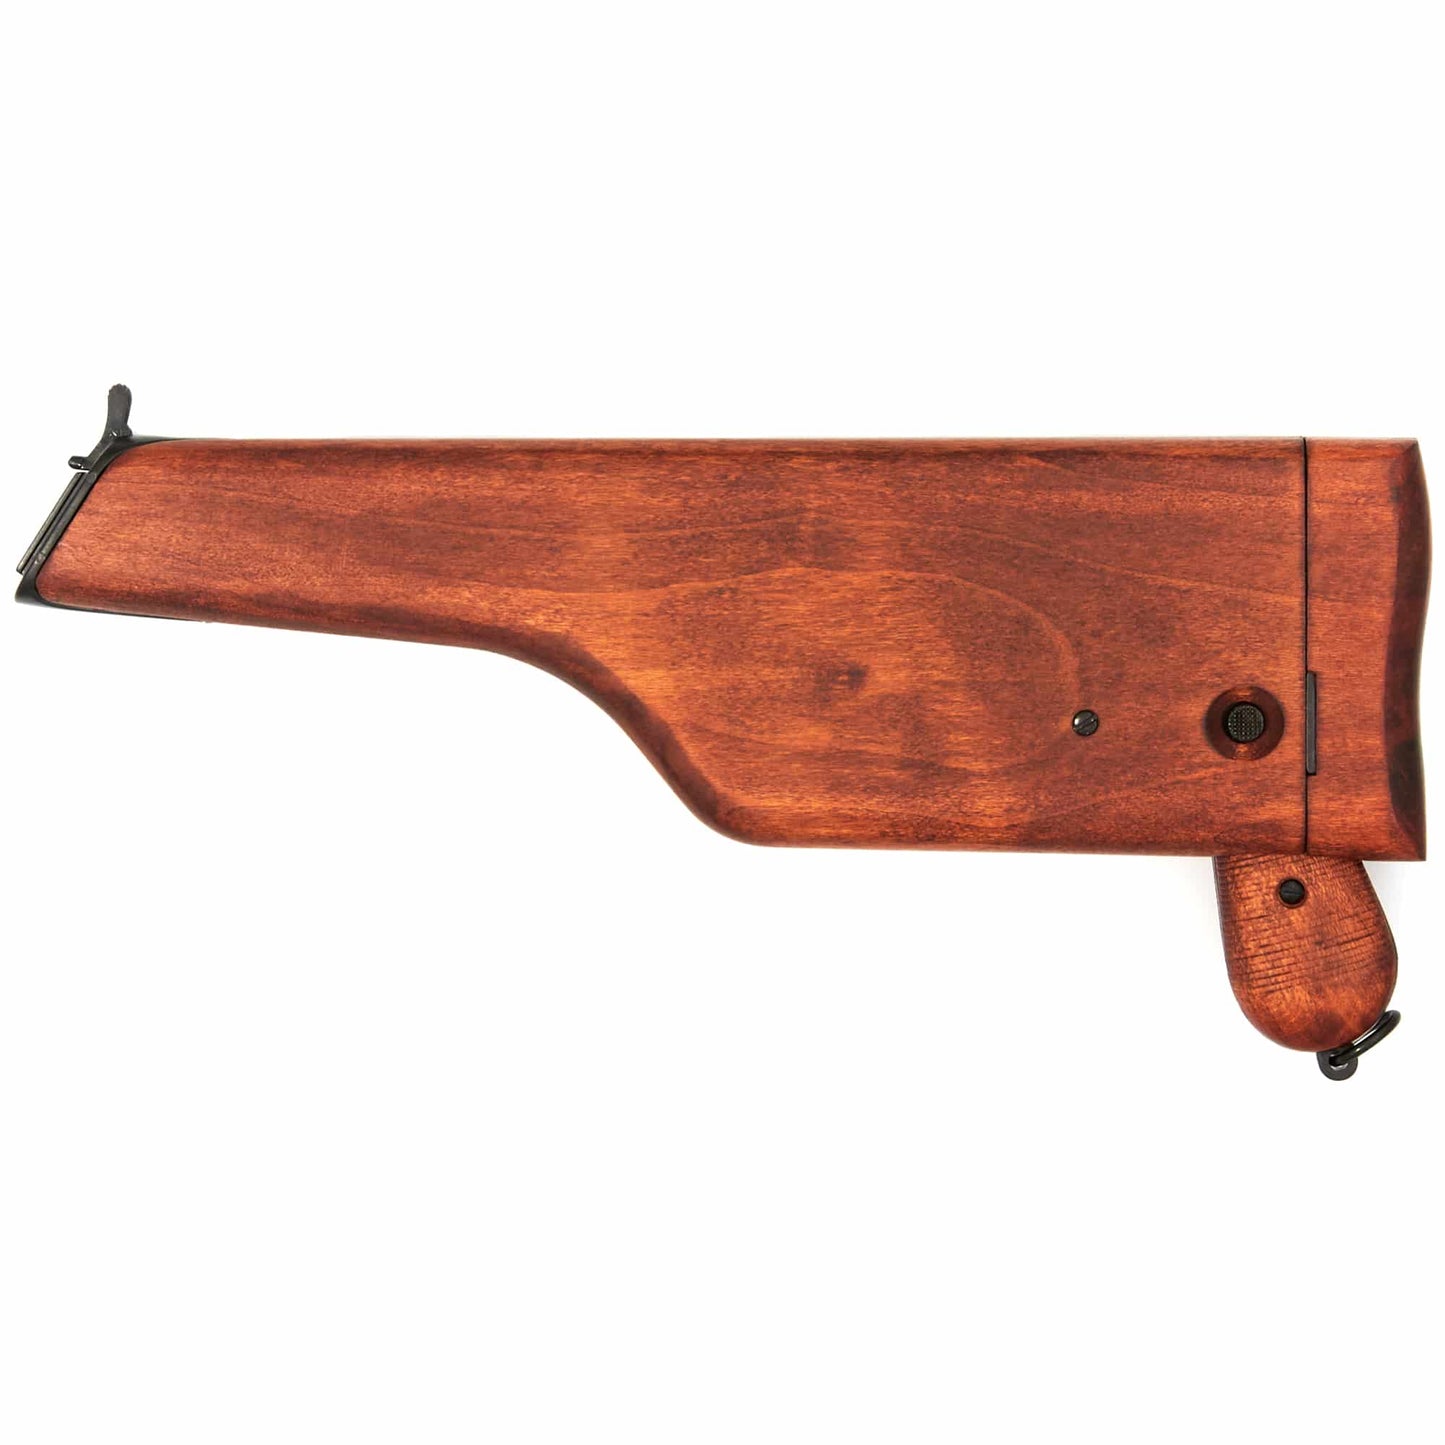 1896 Mauser Automatic Pistol with Folding Stock